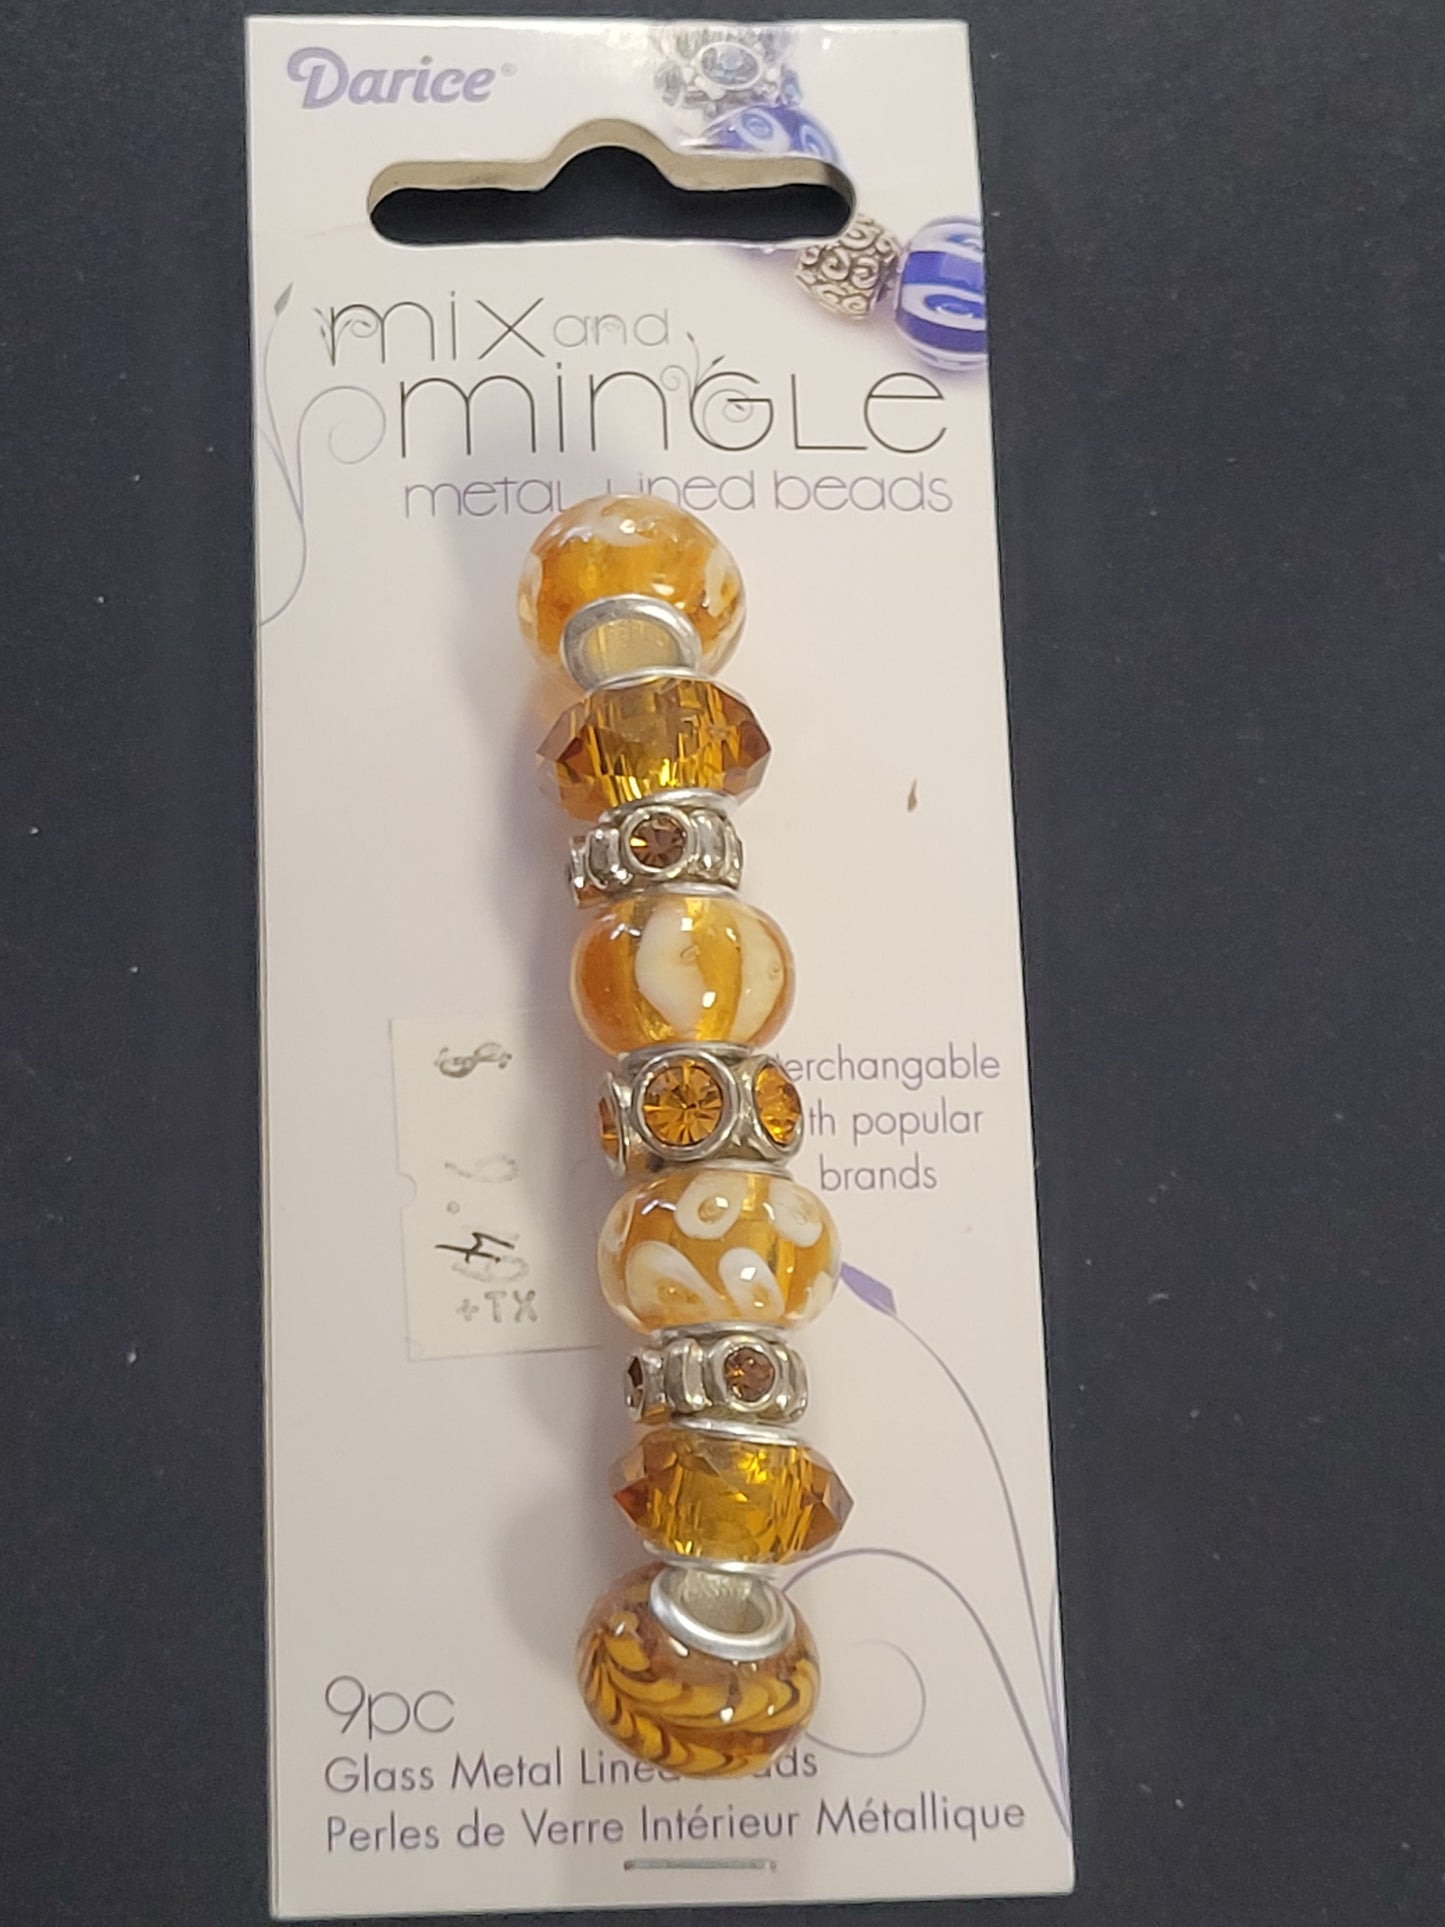 Darice Mix and Mingle Glass Metal-lined Topaz Beads